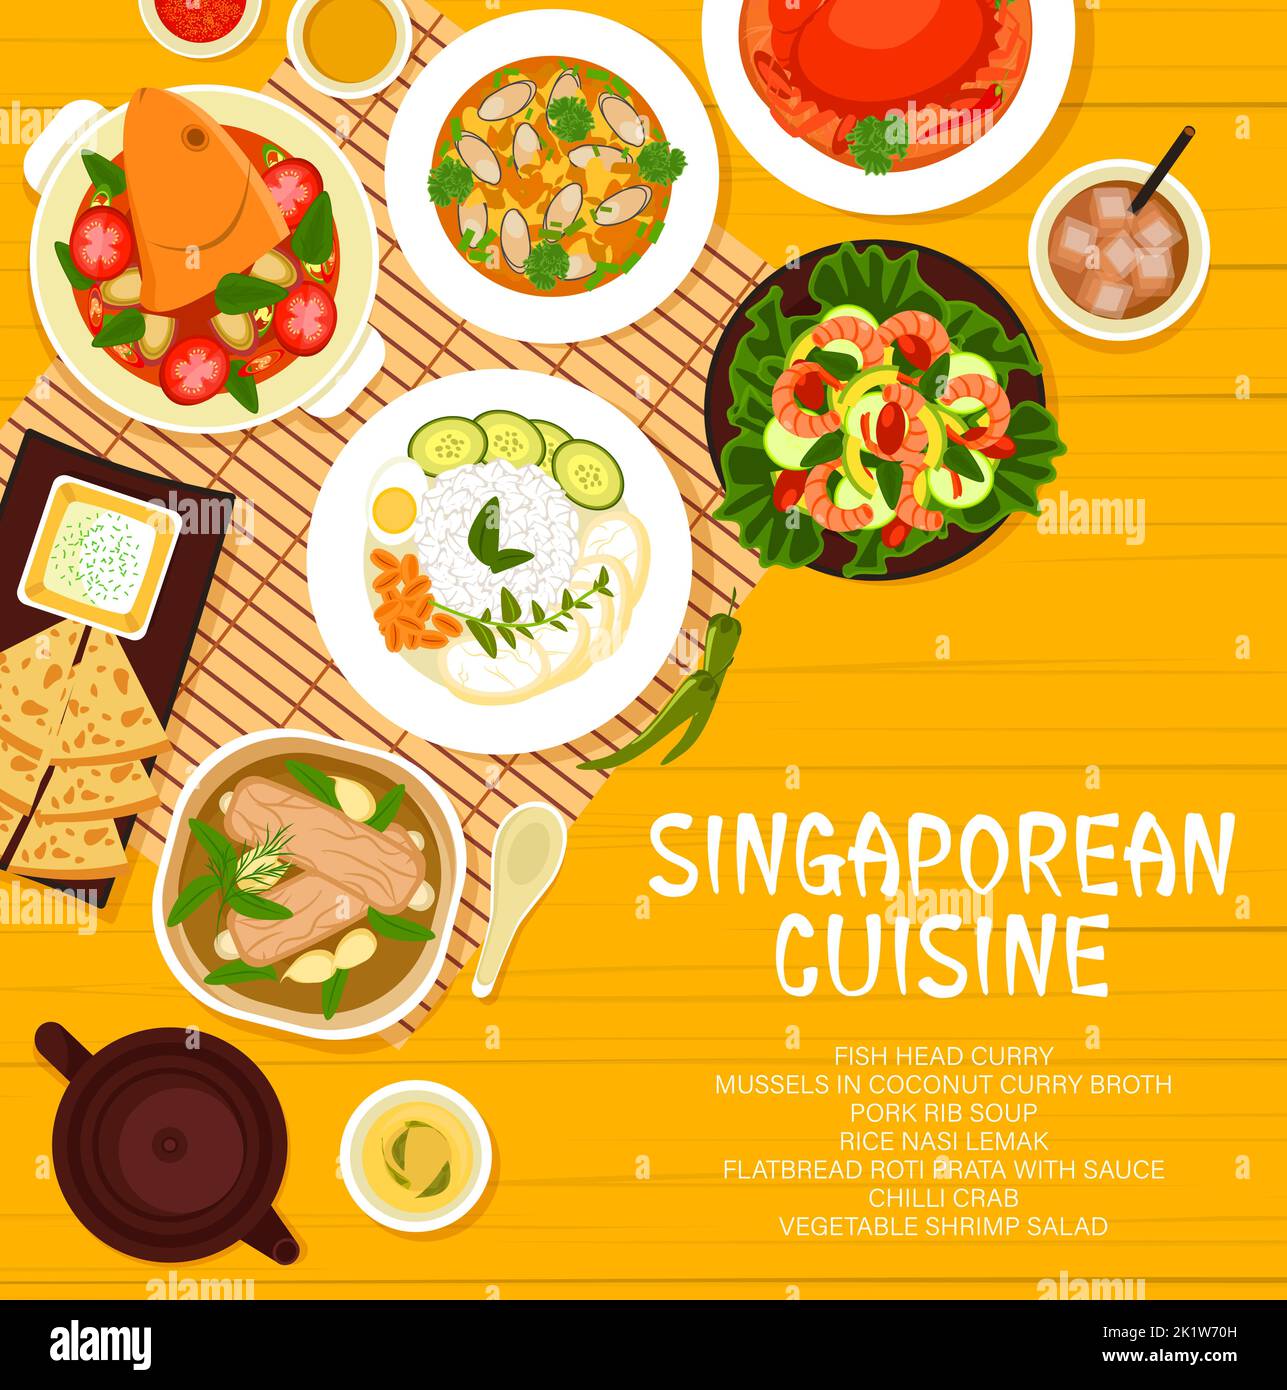 Singaporean cuisine restaurant menu page cover. Chilli crab, vegetable shrimp salad and fish head curry, flatbread Roti Prata with sauce, mussels in coconut curry broth and Nasi Lemak, pork rib soup Stock Vector